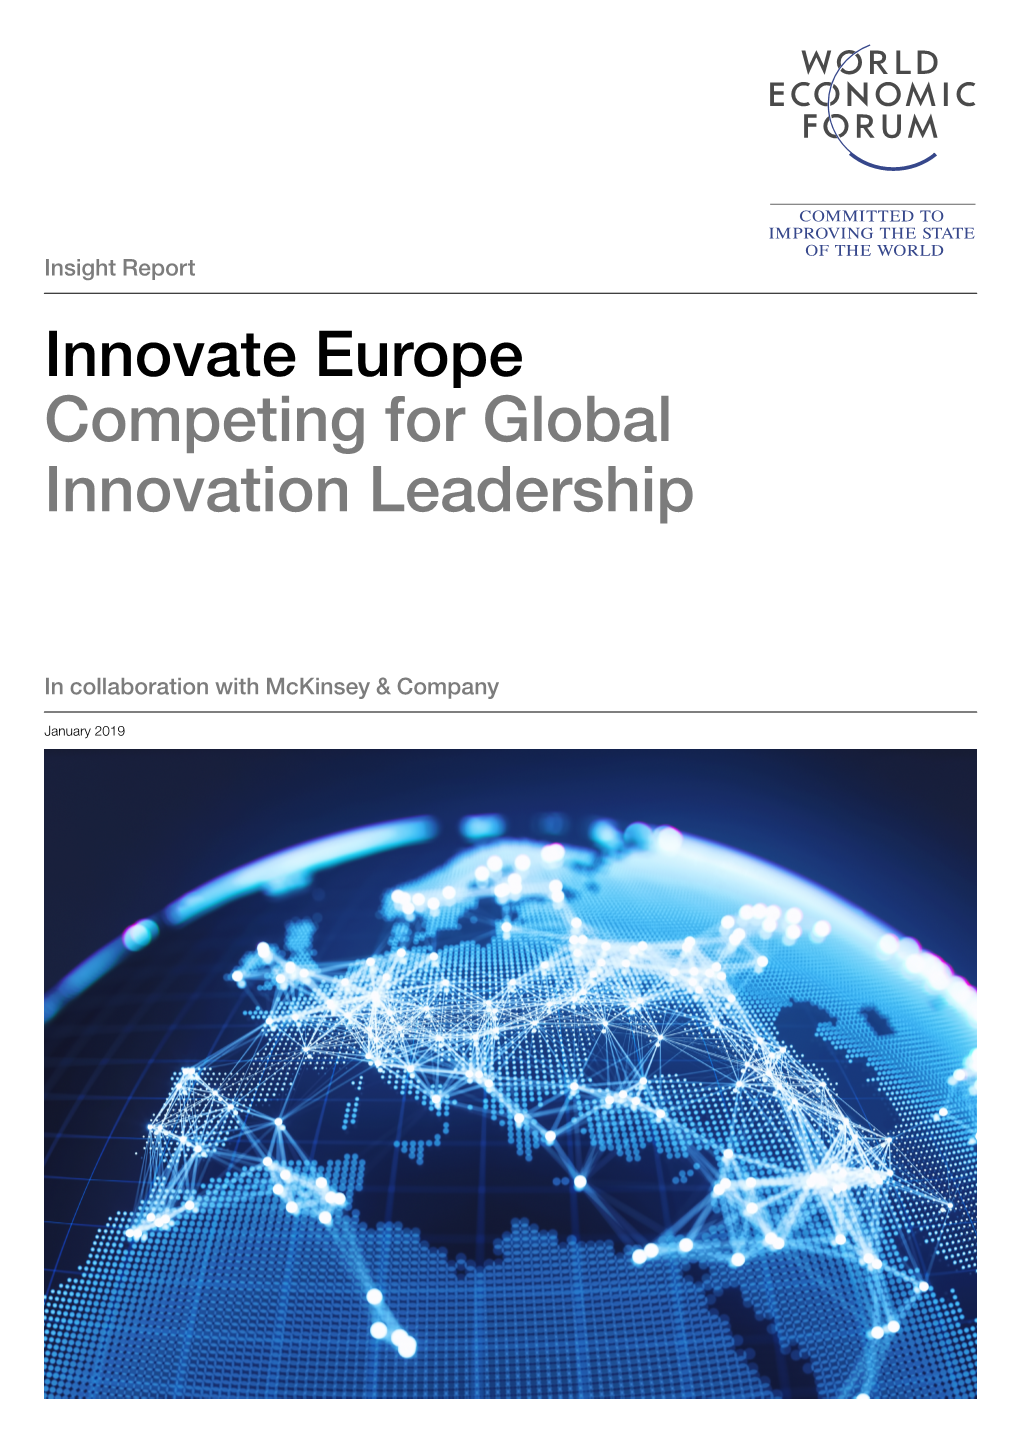 Innovate Europe Competing for Global Innovation Leadership